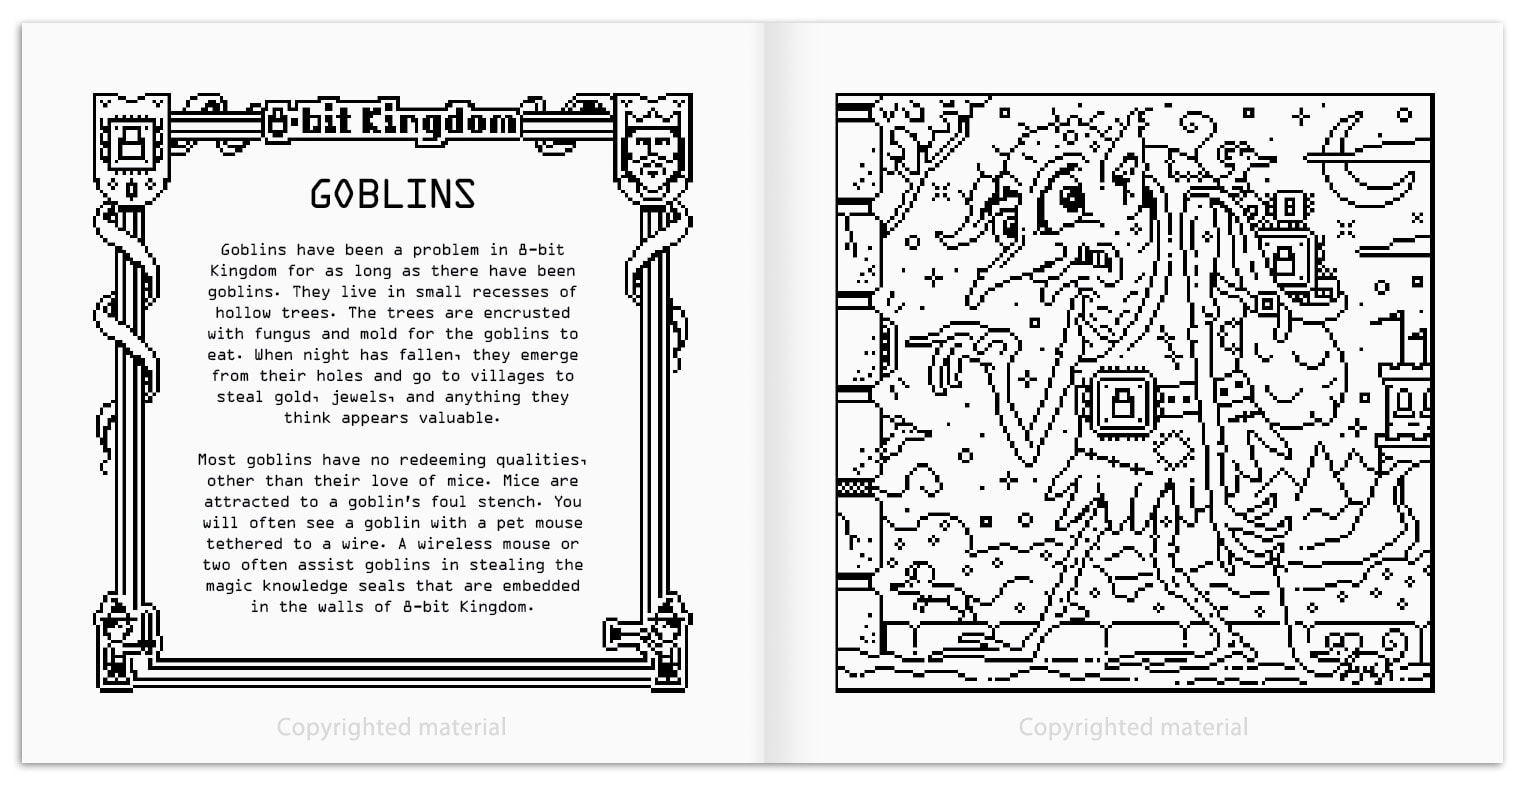 8-bit Kingdom: Medieval tales of computer technology sample pages about goblins.